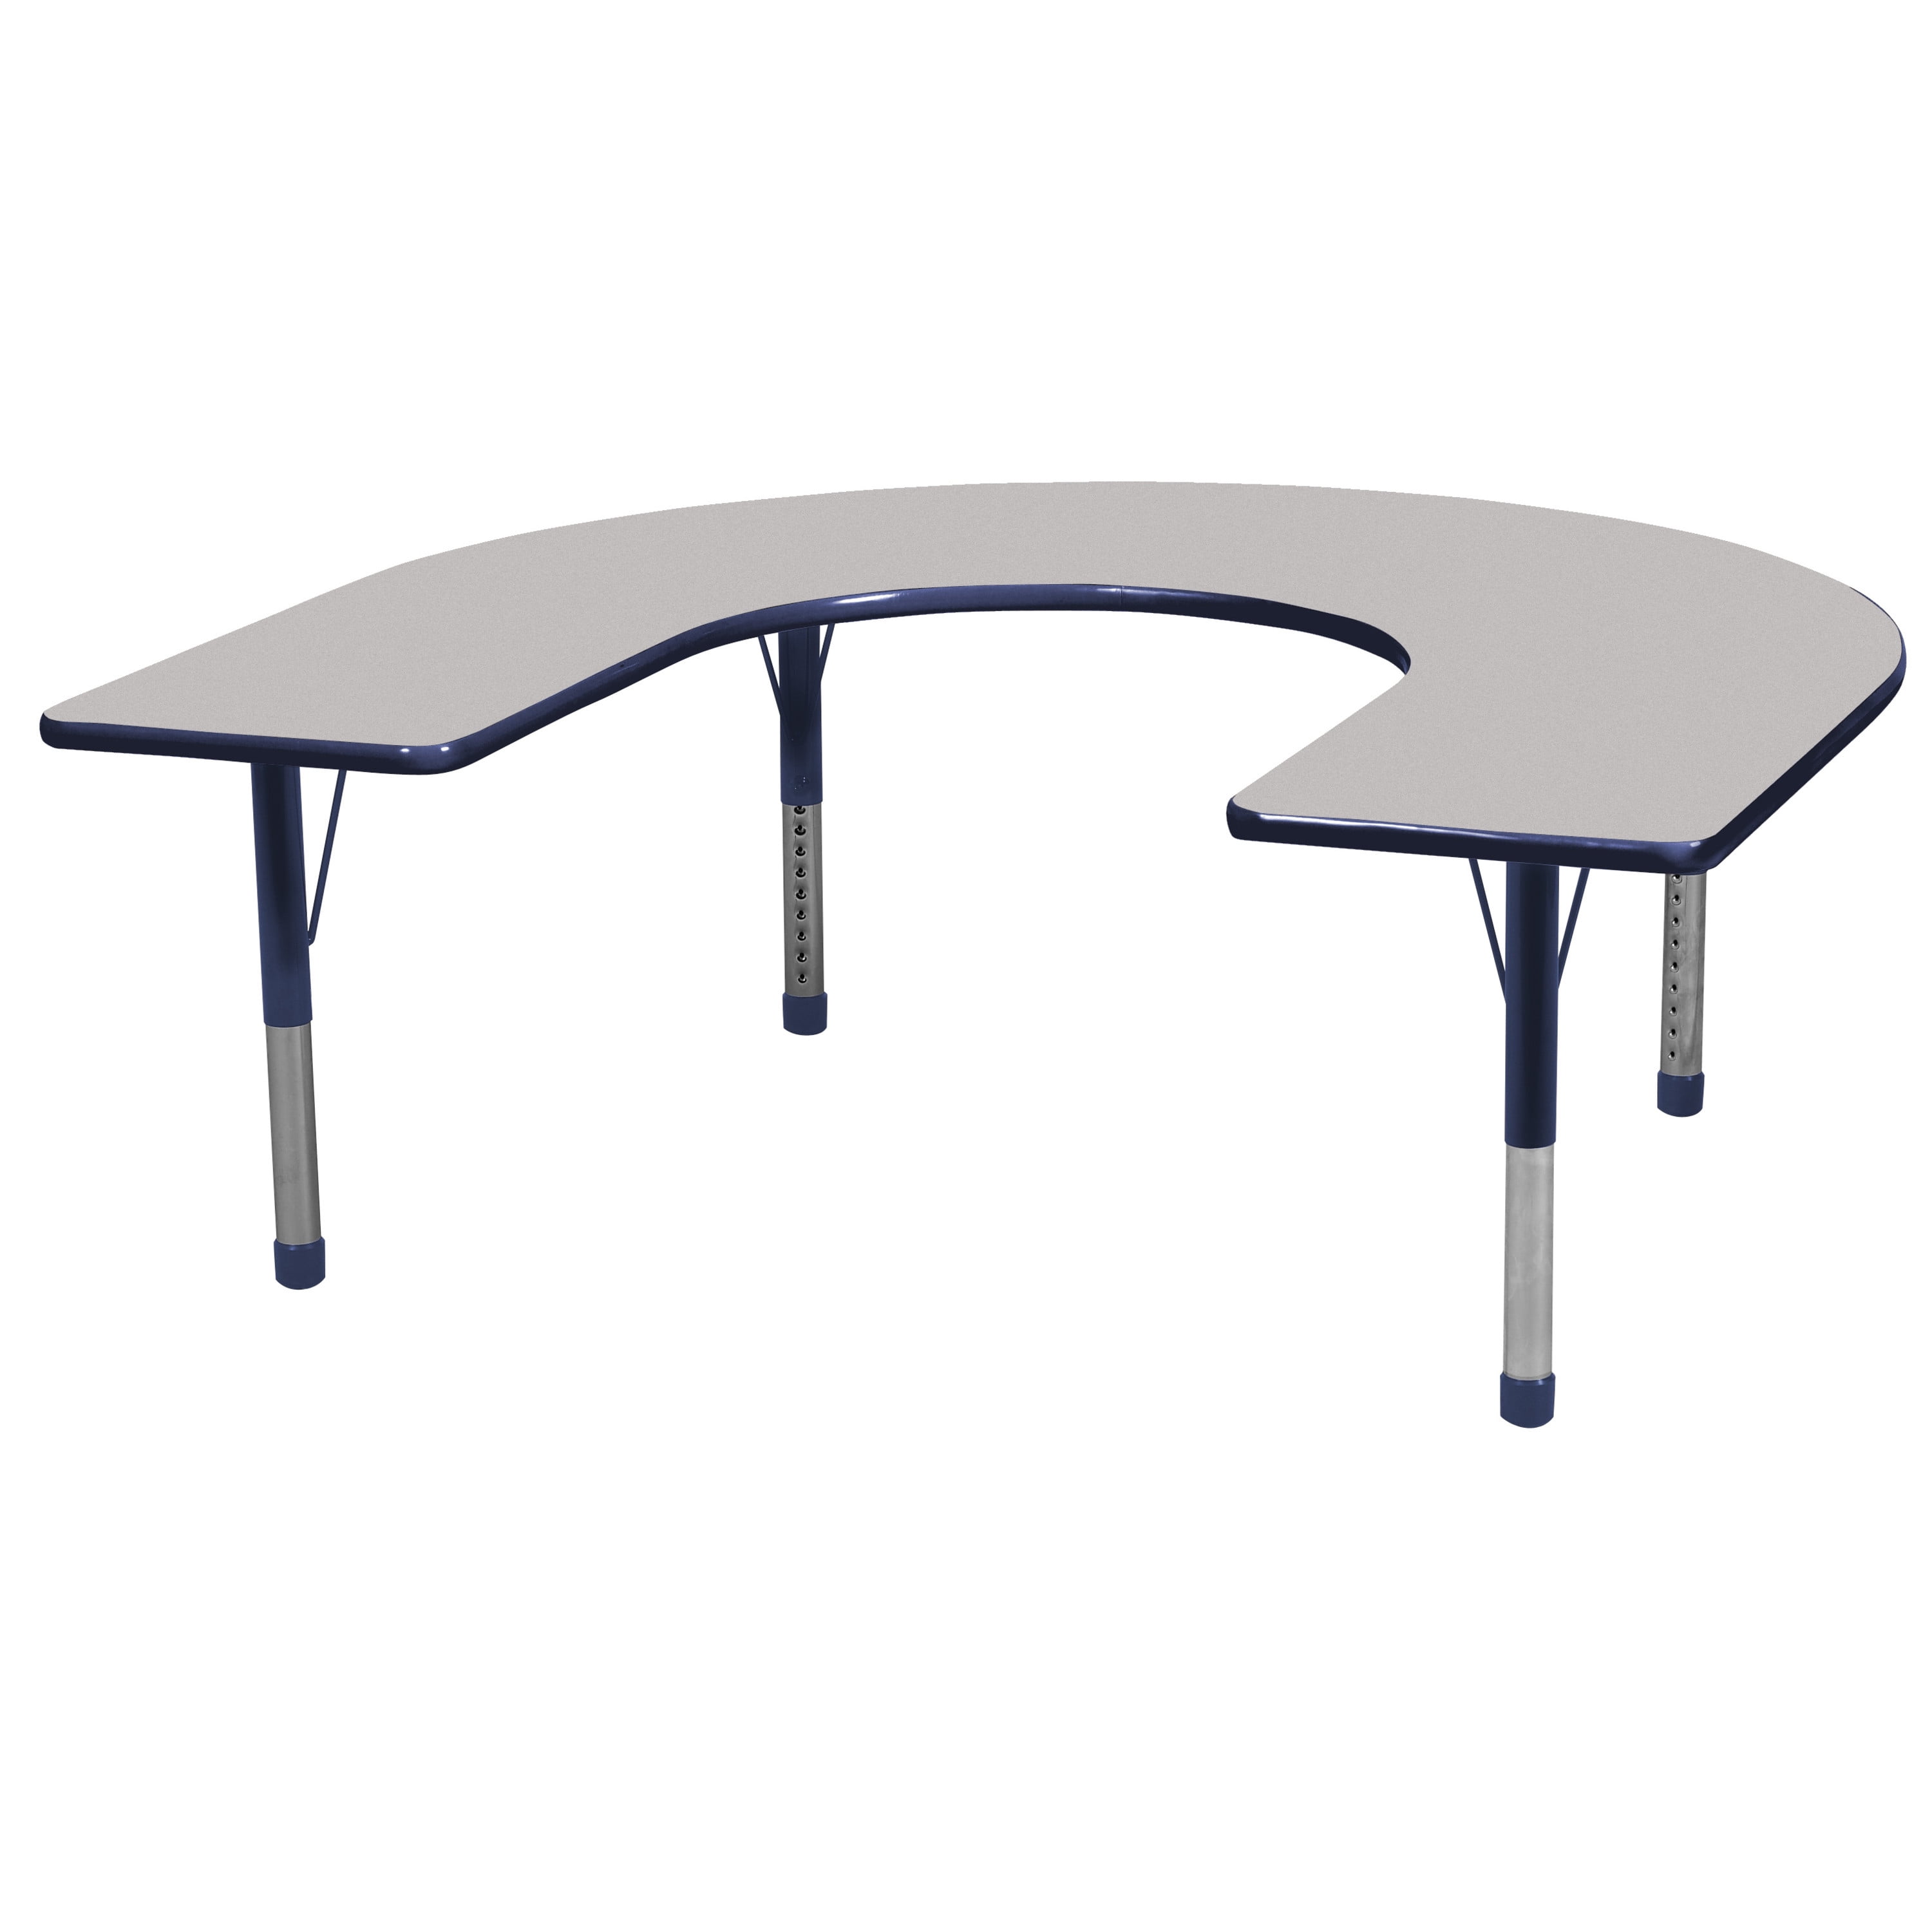 ECR4Kids Thermo-Fused 60 x 66 Horseshoe Activity School Table Grey/Navy Chunky Legs Adjustable Height 15-24 inch 